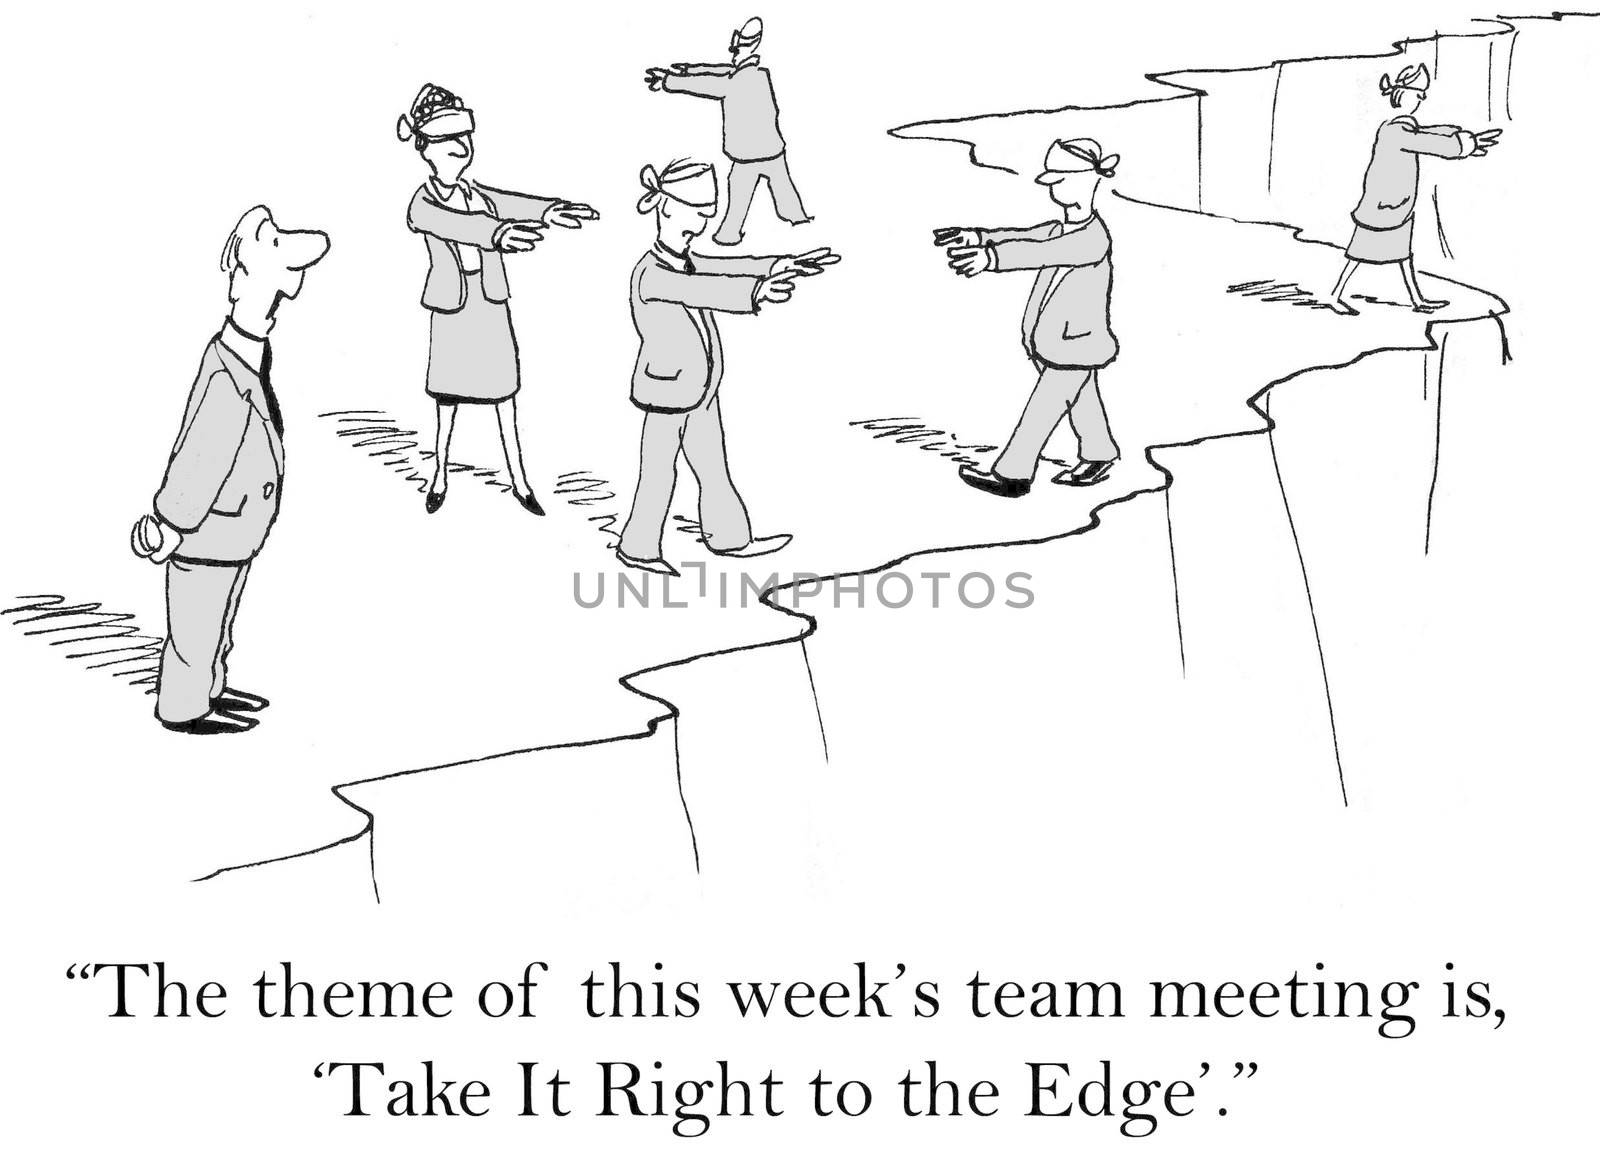 "The theme of this week's team meeting is 'take it right to the edge'."